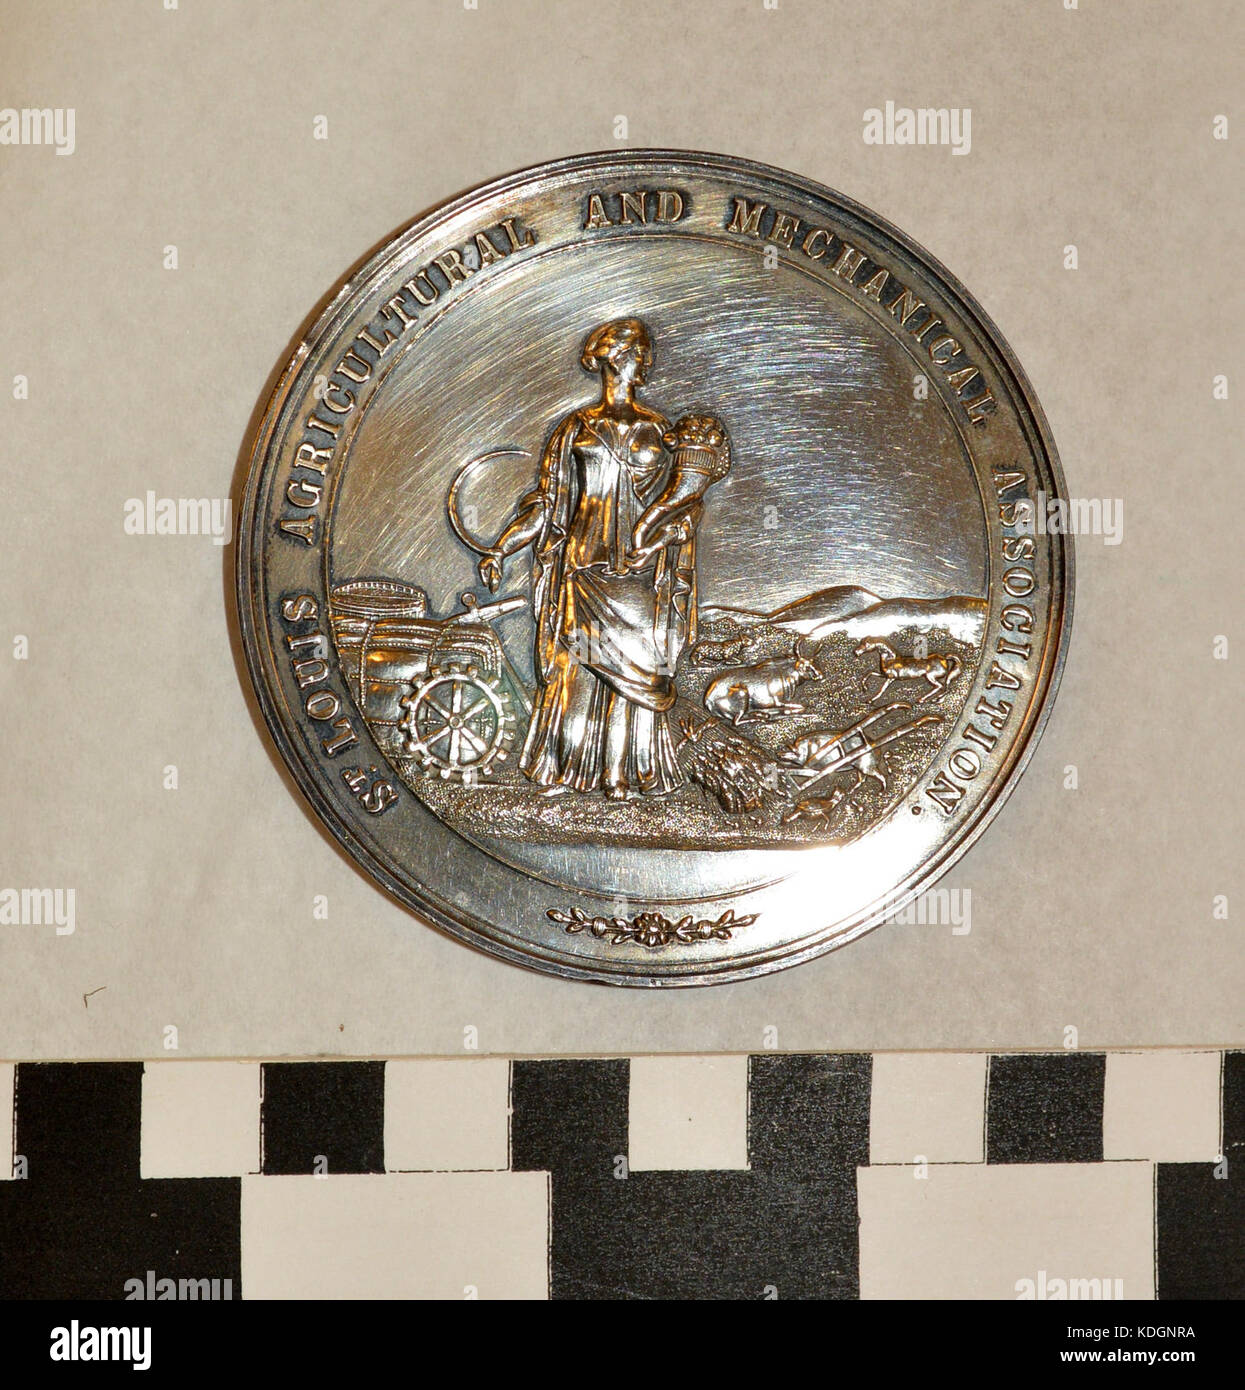 Medal awarded to Julius S. Walsh for best machine for removing snow Stock Photo